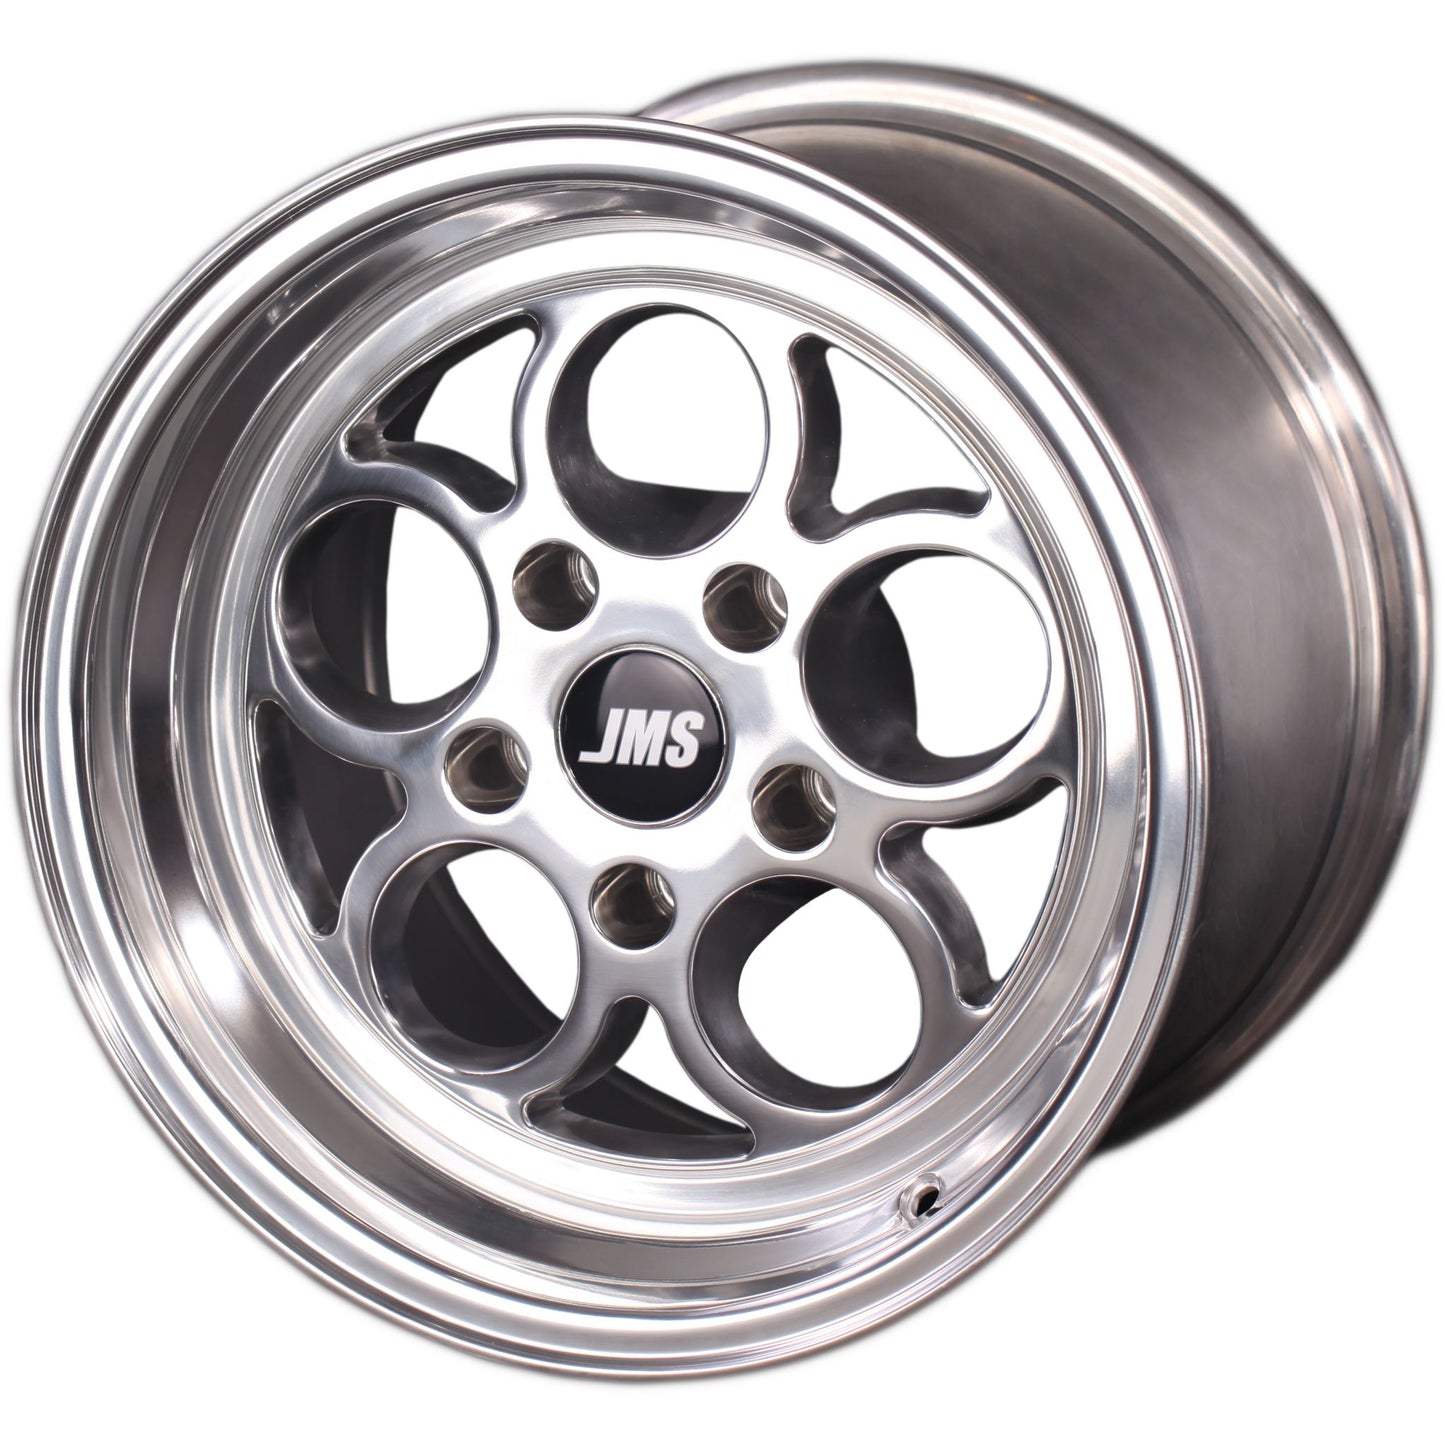 JMS Savage Series Race Wheels - Polished Finish; 17 inch X 4.5 inch Front Wheel w/ Lug Nuts -- Fits 2006-2021 Dodge Challenger and Charger S1745175DP